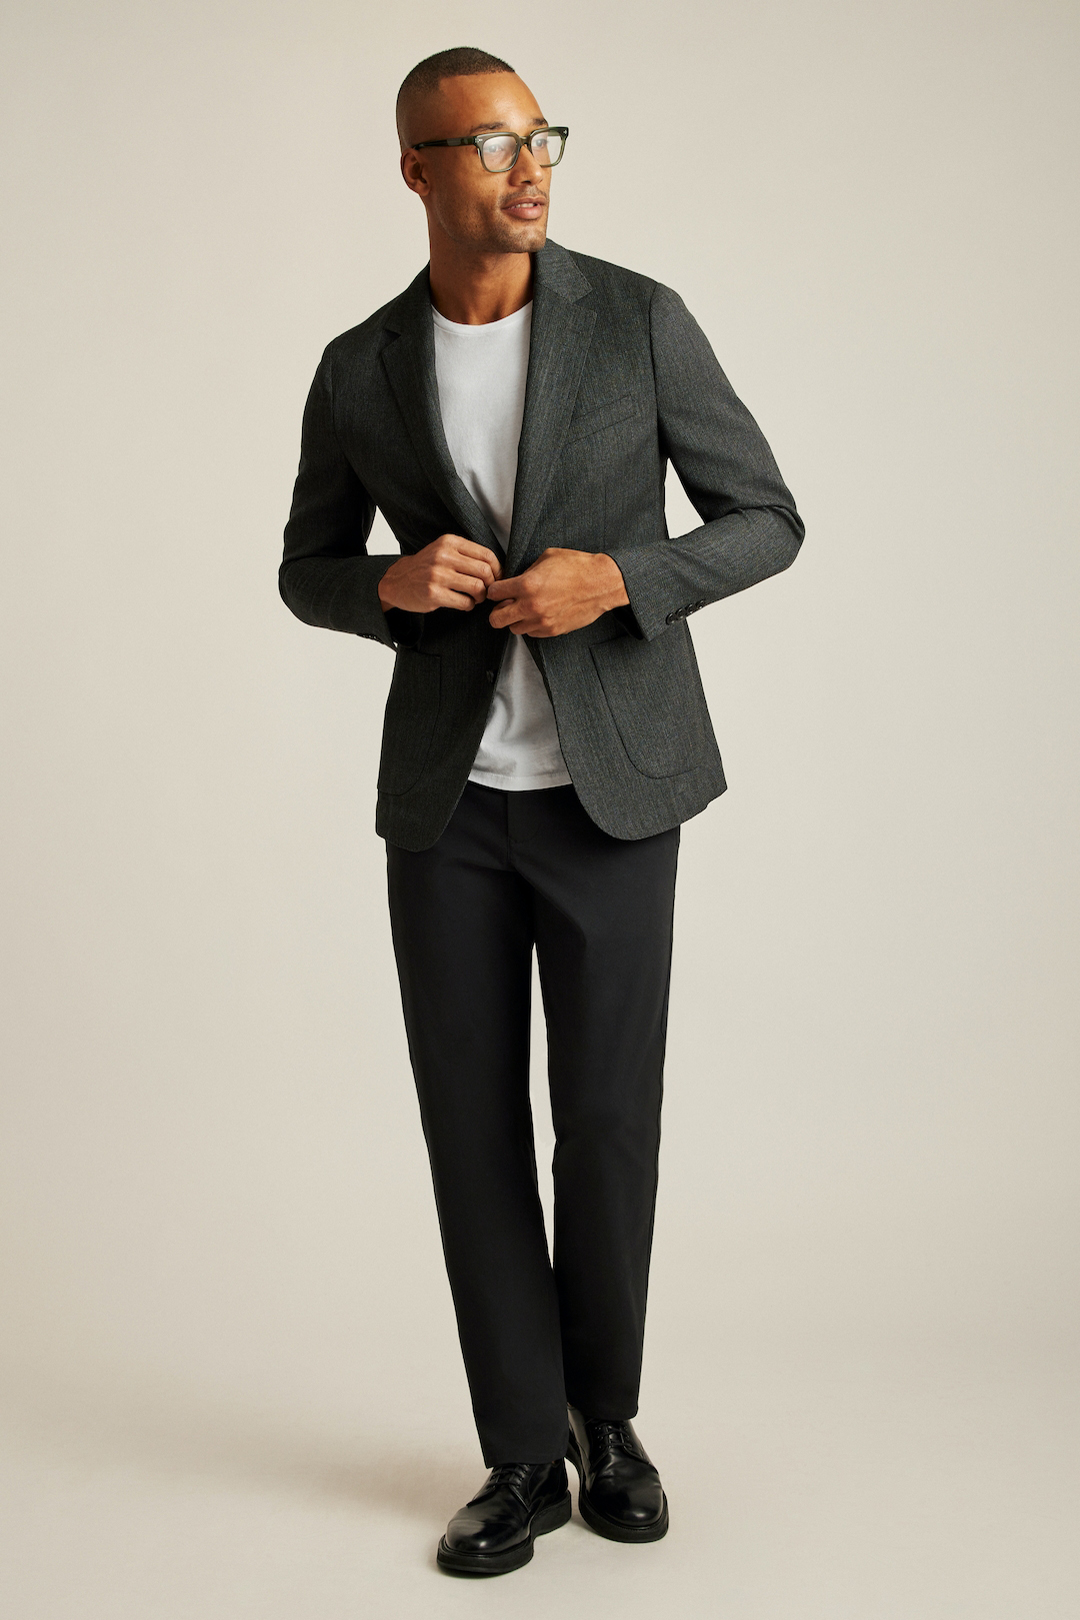 Charcoal gray blazer, white t-shirt, black pants, and black derby shoe outfit